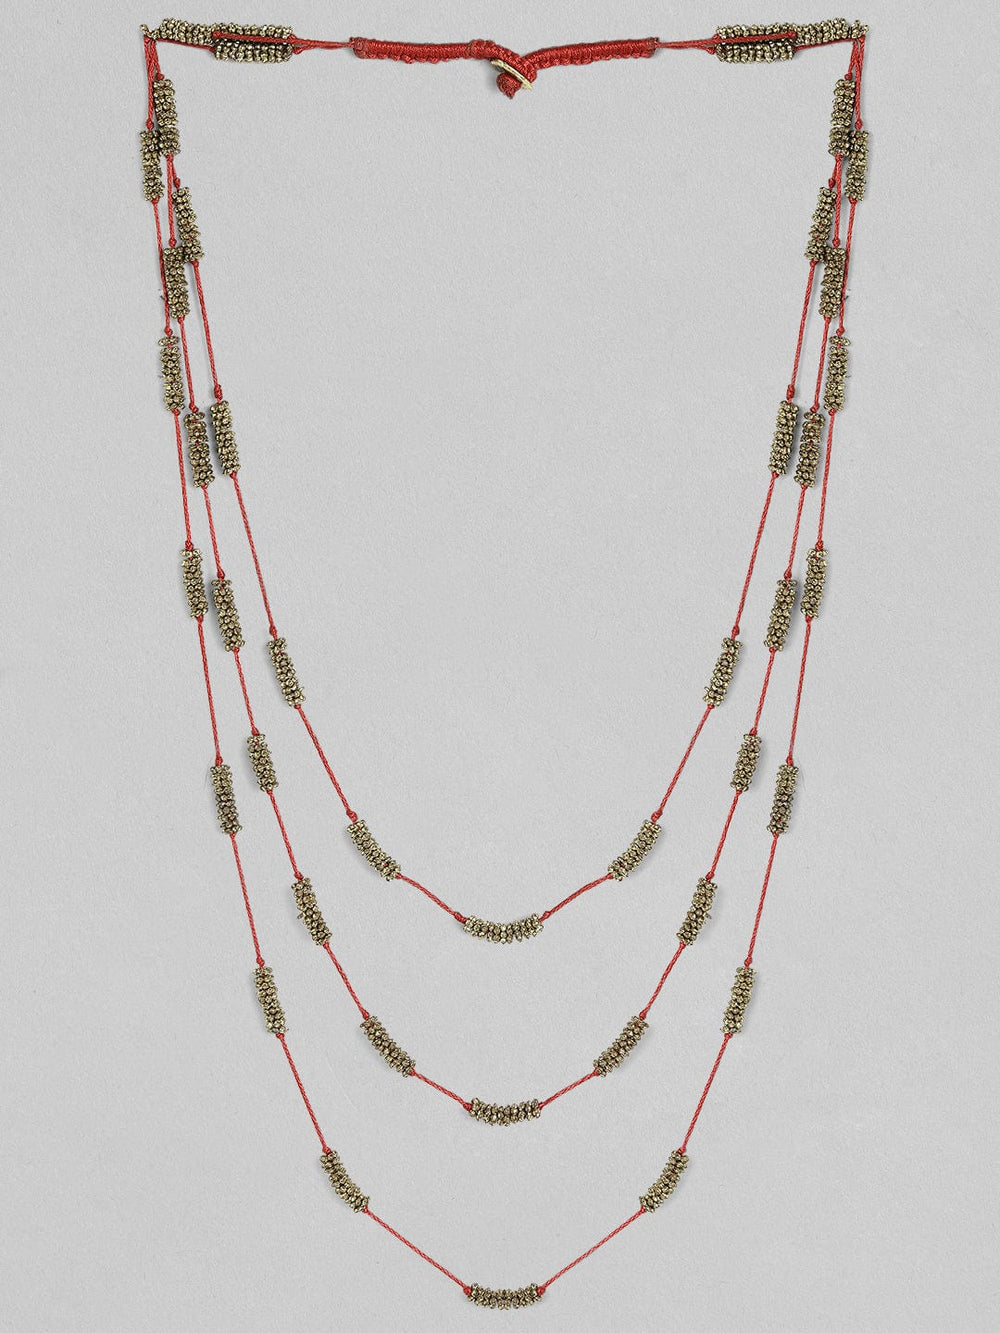 Rubans Voguish Antique Polished Red Multi layered necklace. Chain & Necklaces